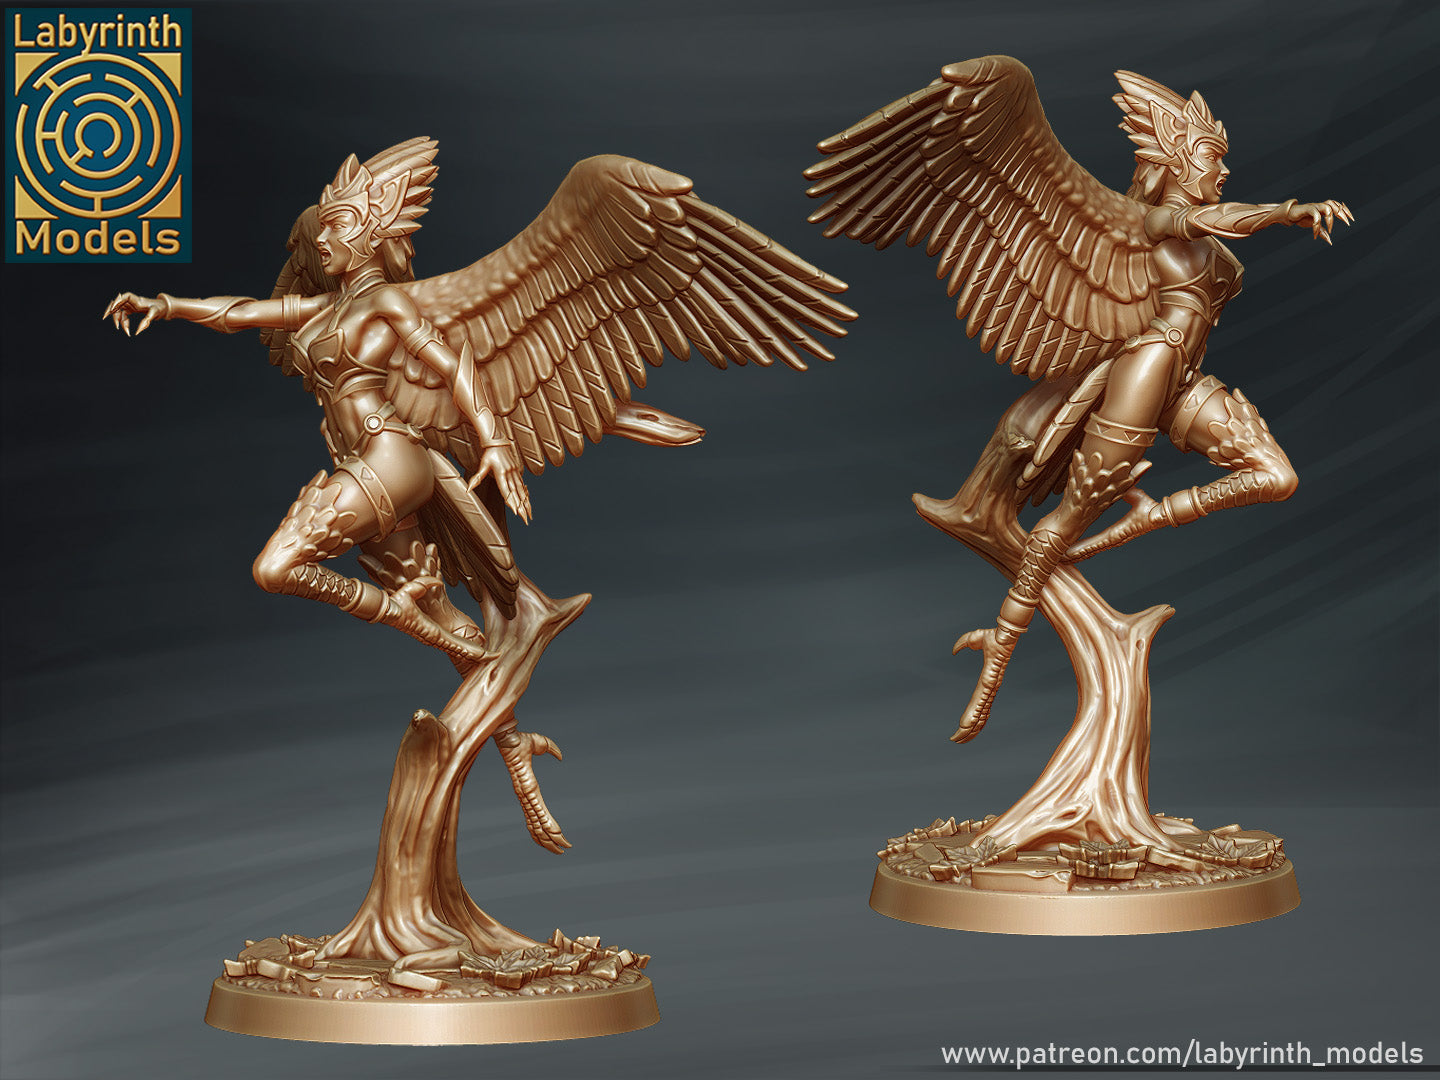 Harpies by Labyrinth Models